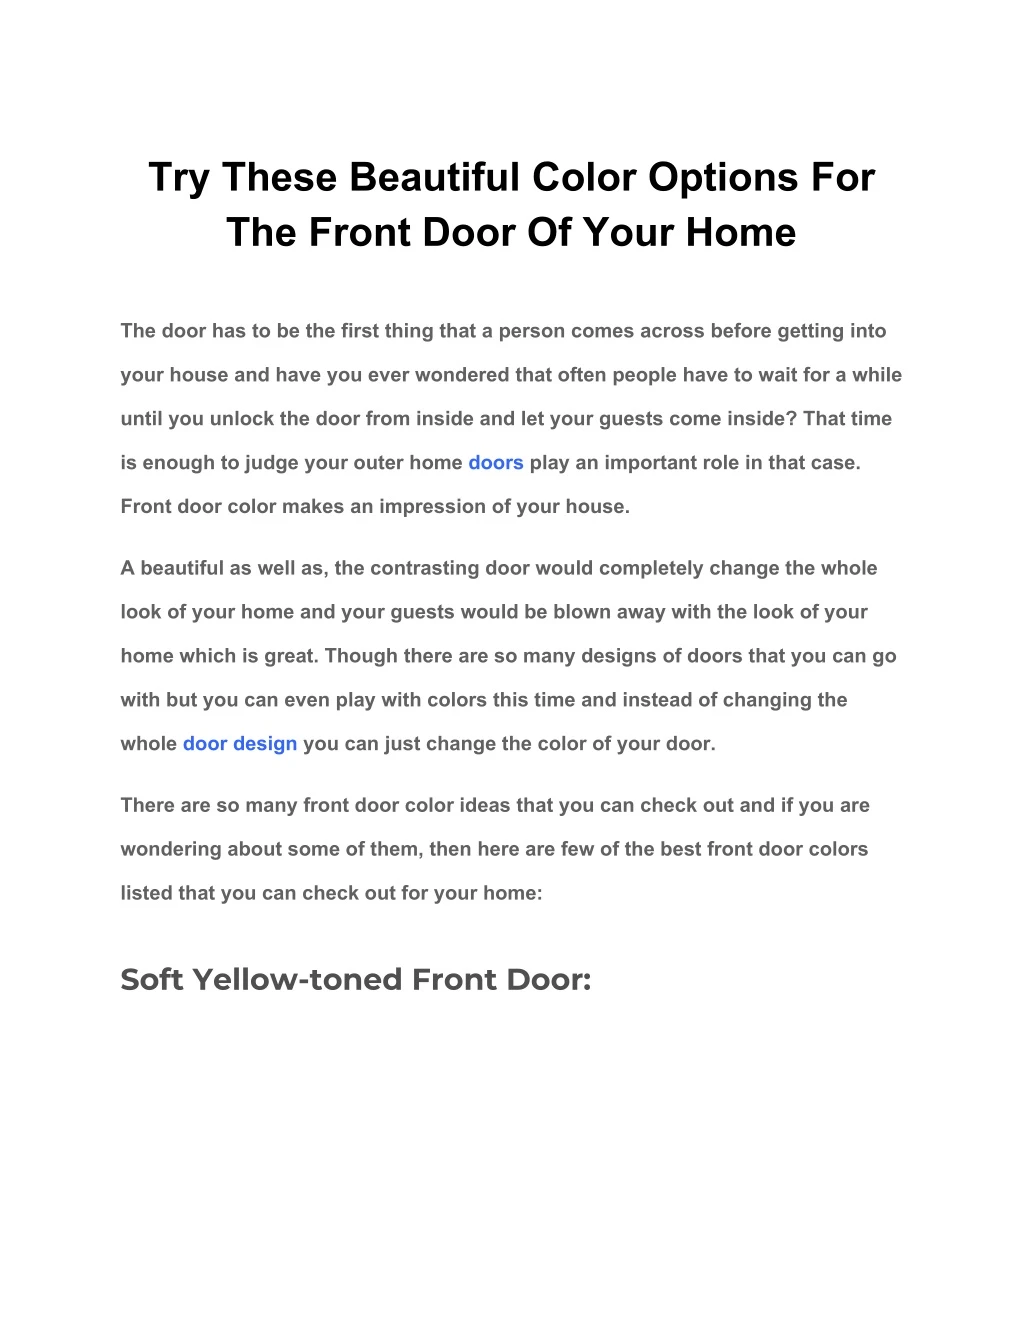 try these beautiful color options for the front